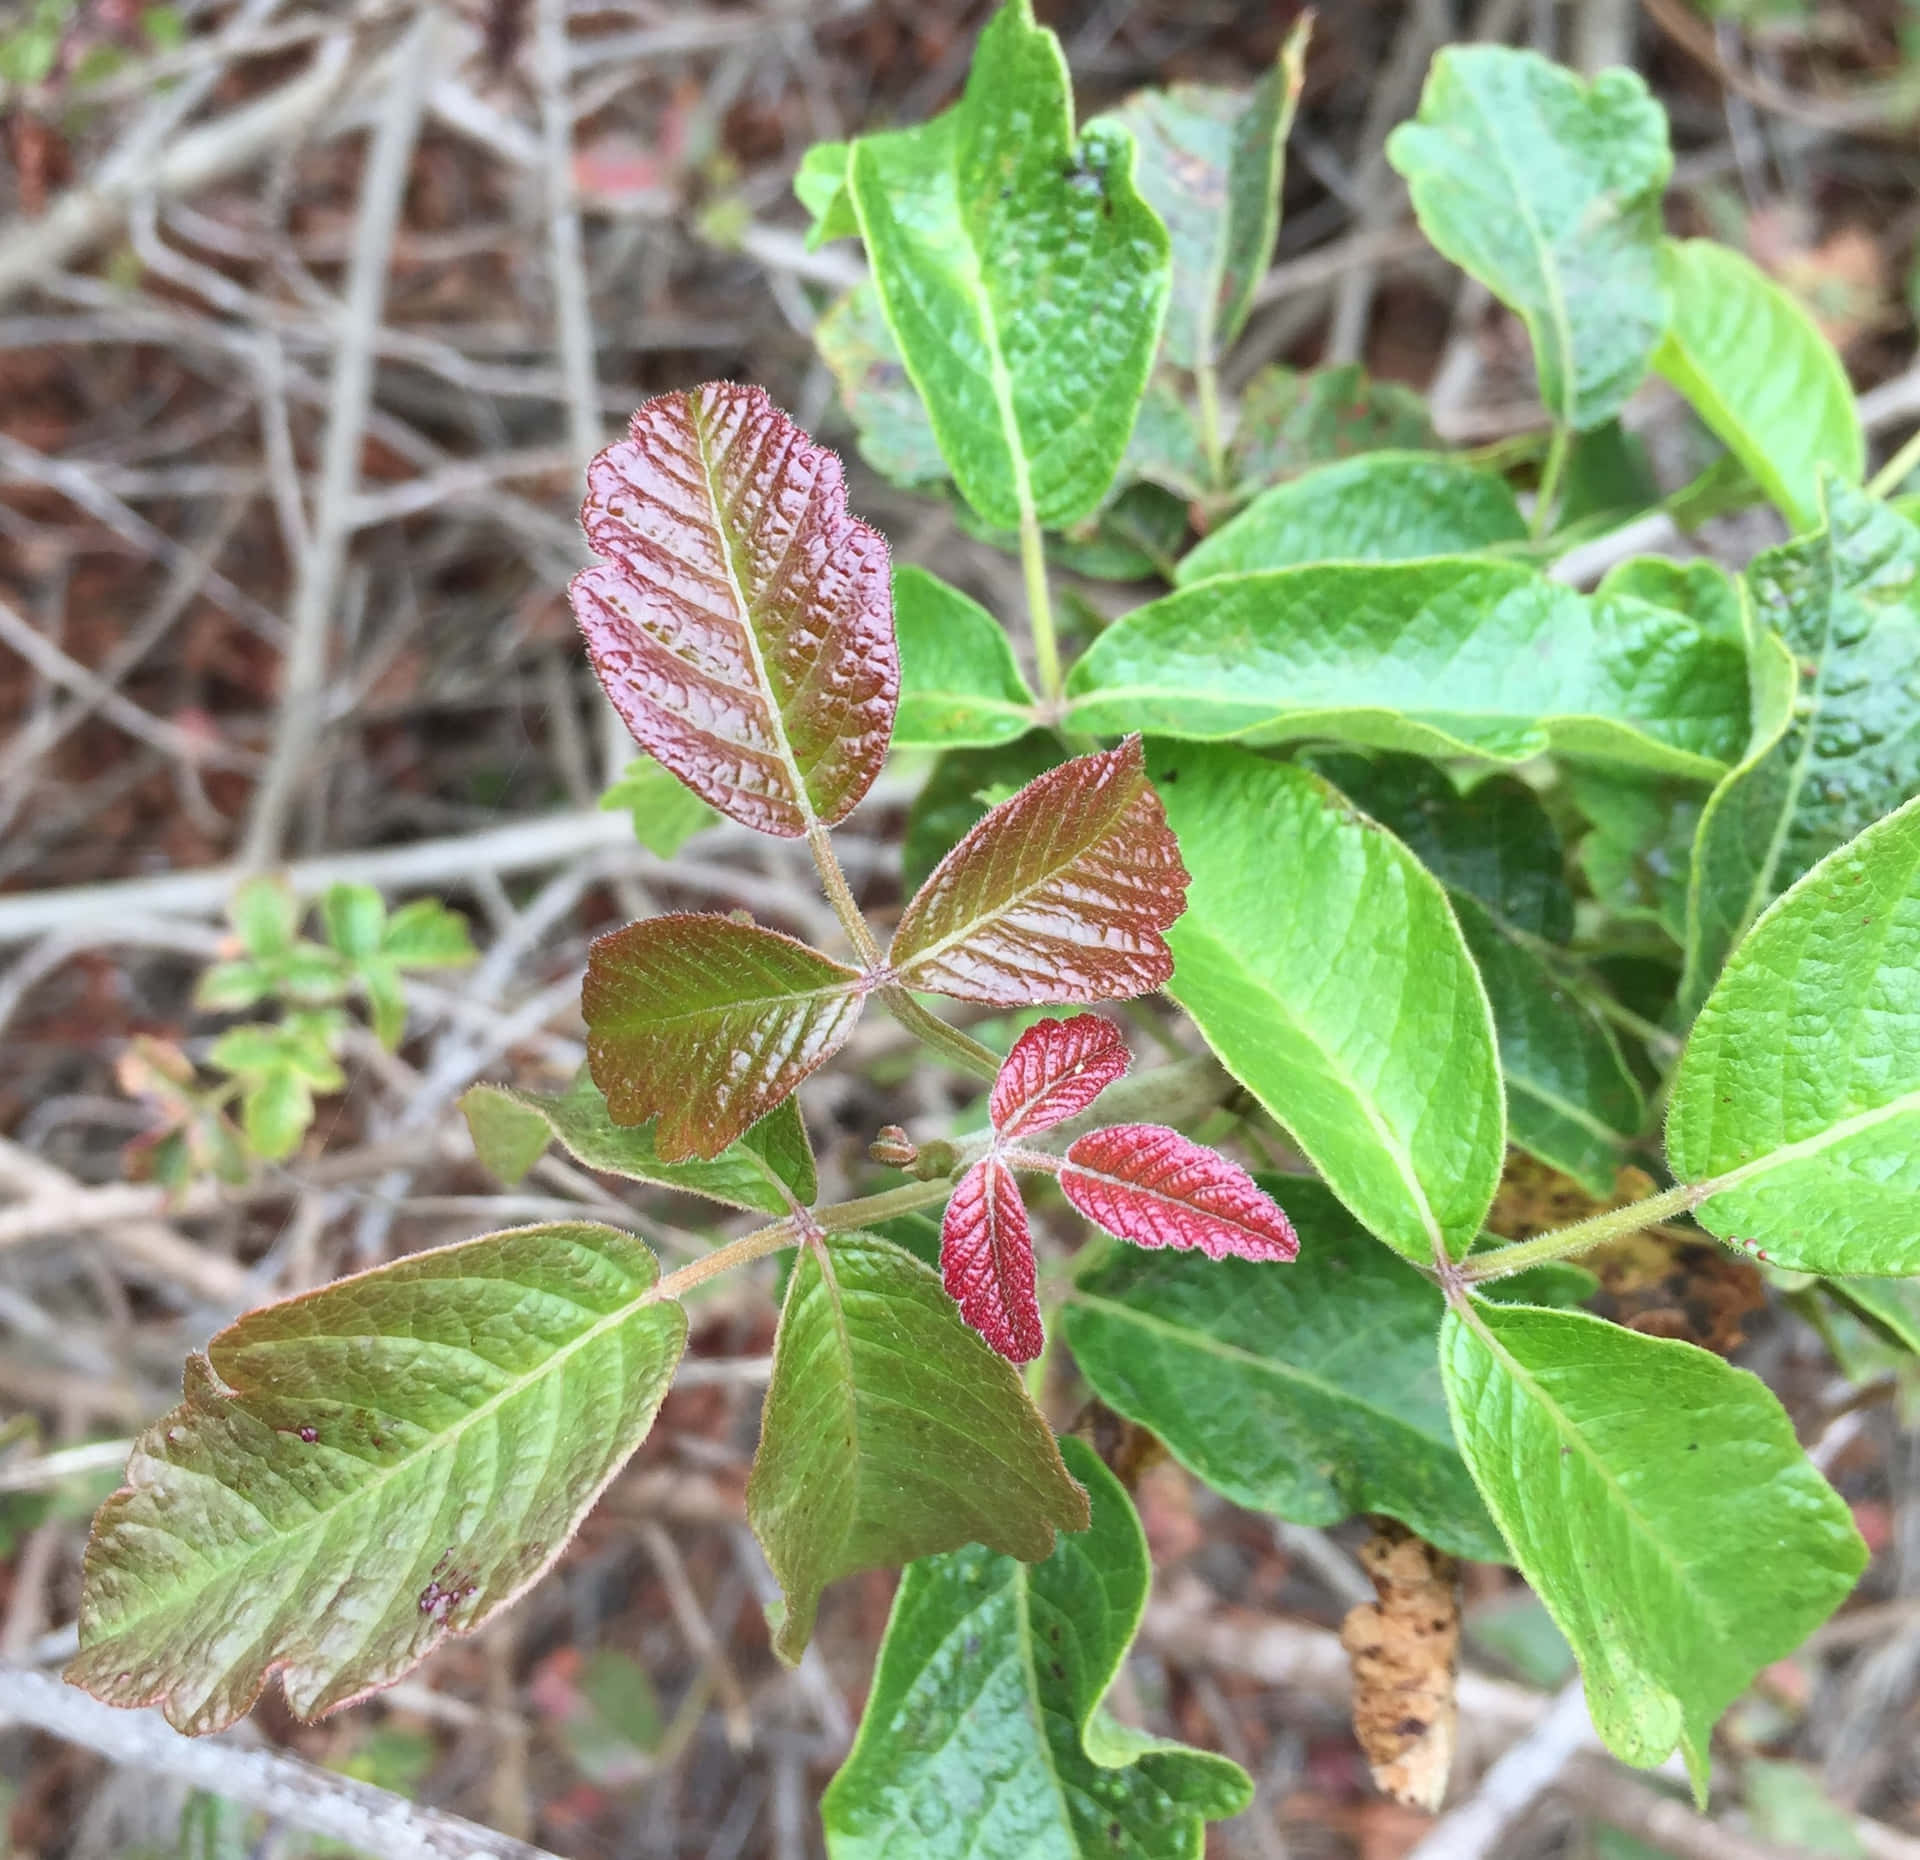 Download Detail of Poison Oak Leafs in High-Resolution | Wallpapers.com